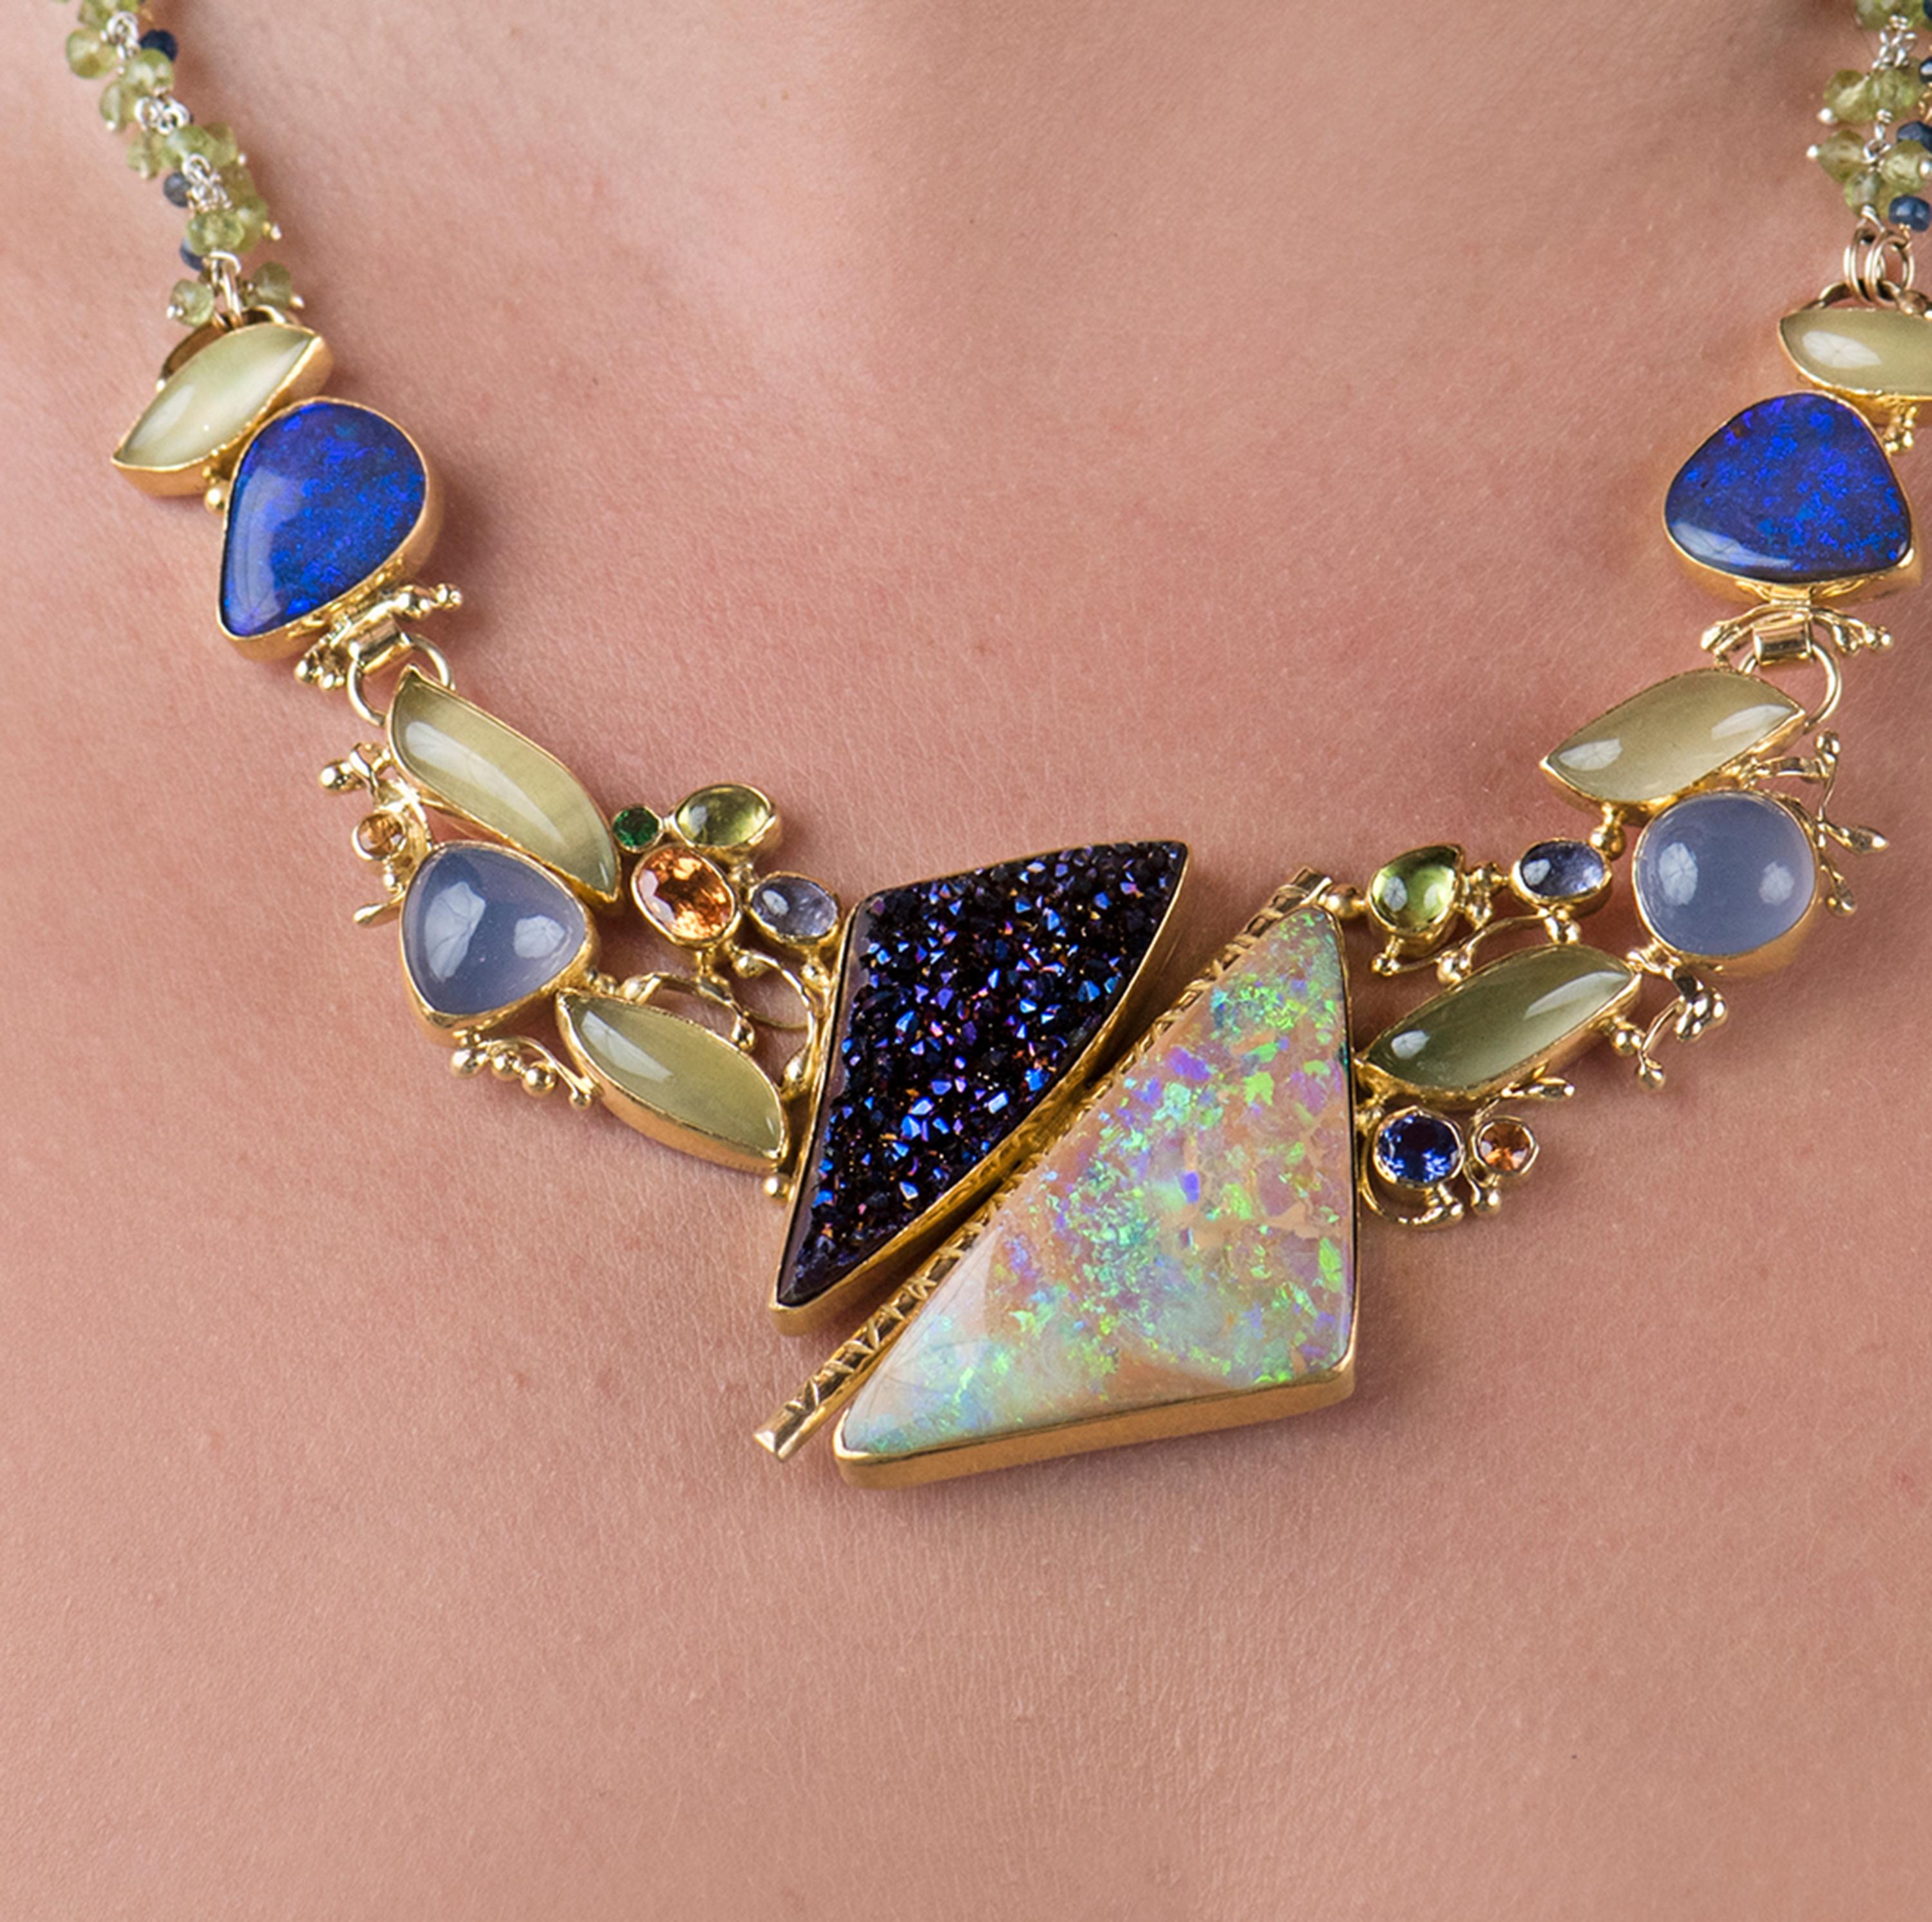 aquamarine tanzanite and opal necklace with 18kt gold three ring clasp